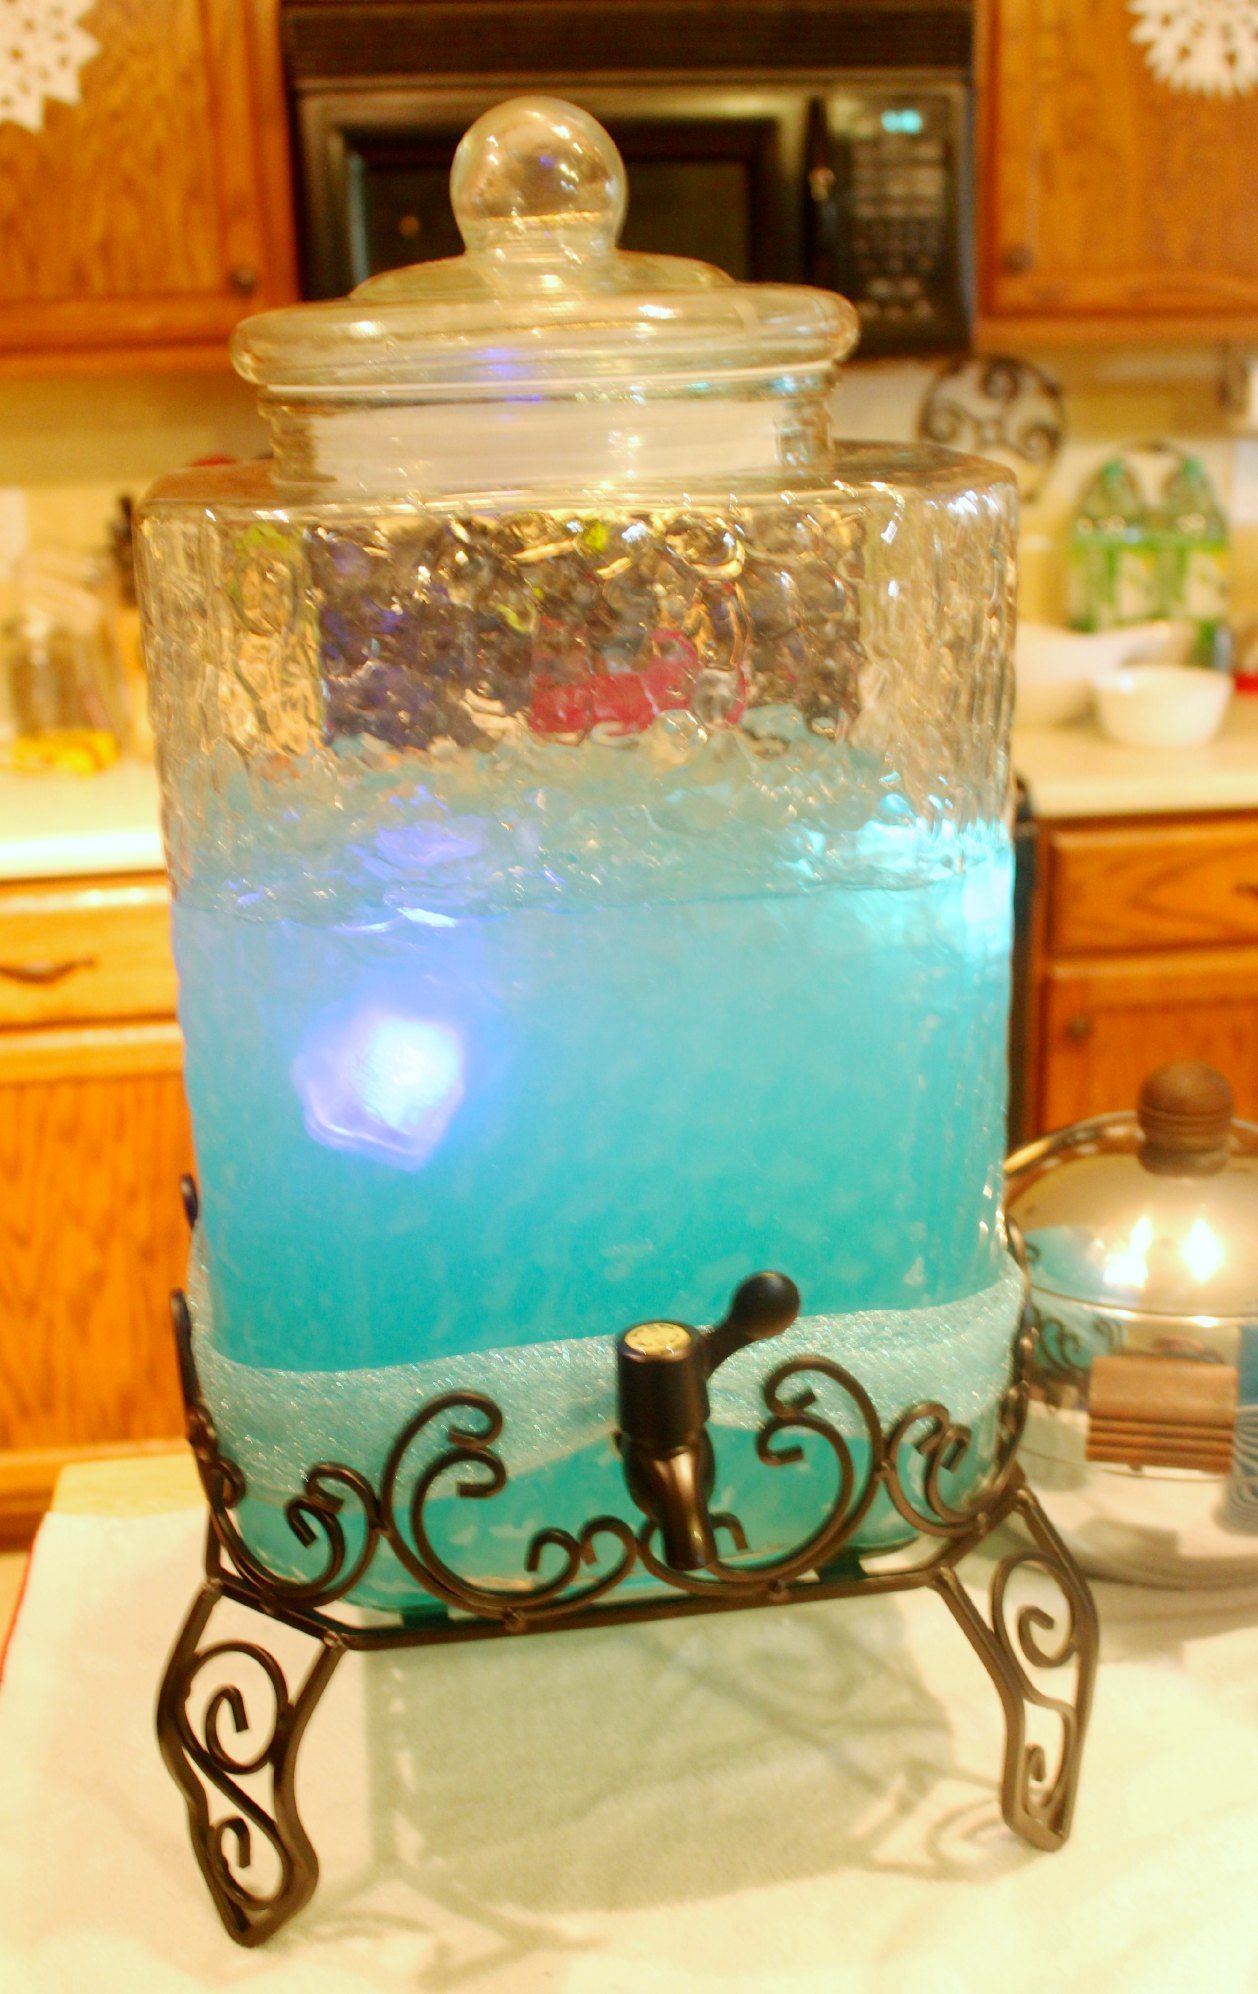 FROZEN party punch…8 cups blue Hawaiian punch, 3 1/2 cups Simply Lemonade, 4 1/4 cups Sprite